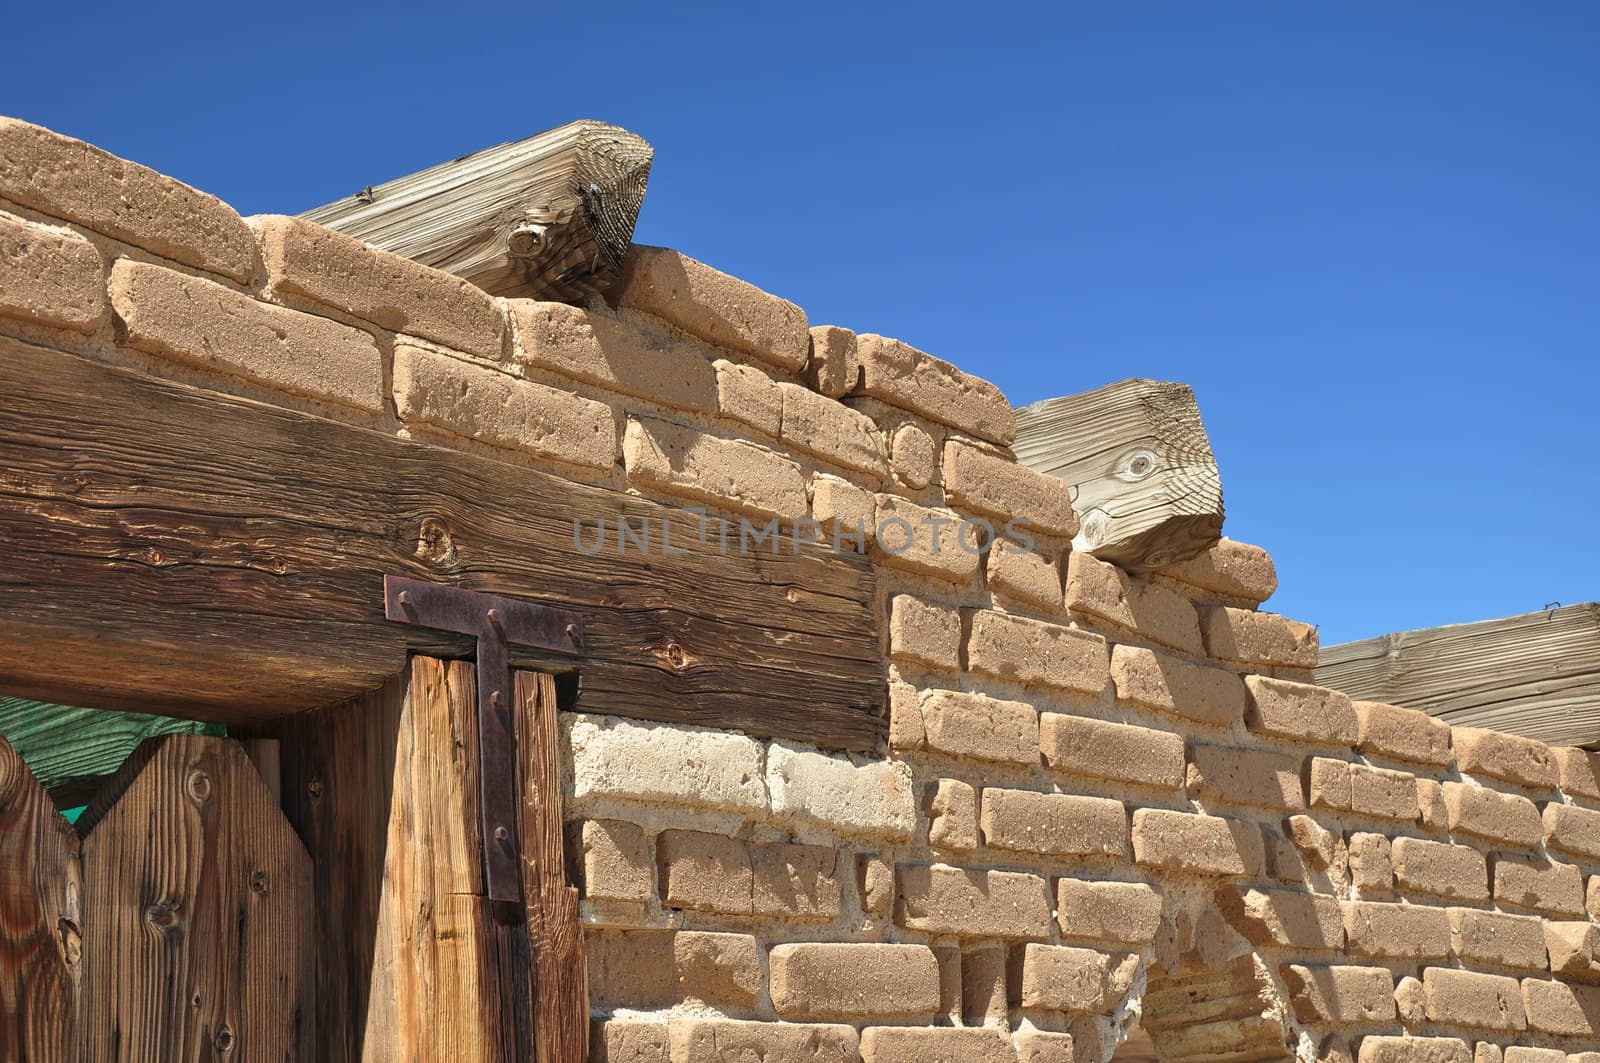 Close up view of an old adobe wall in Pioneertown, California.